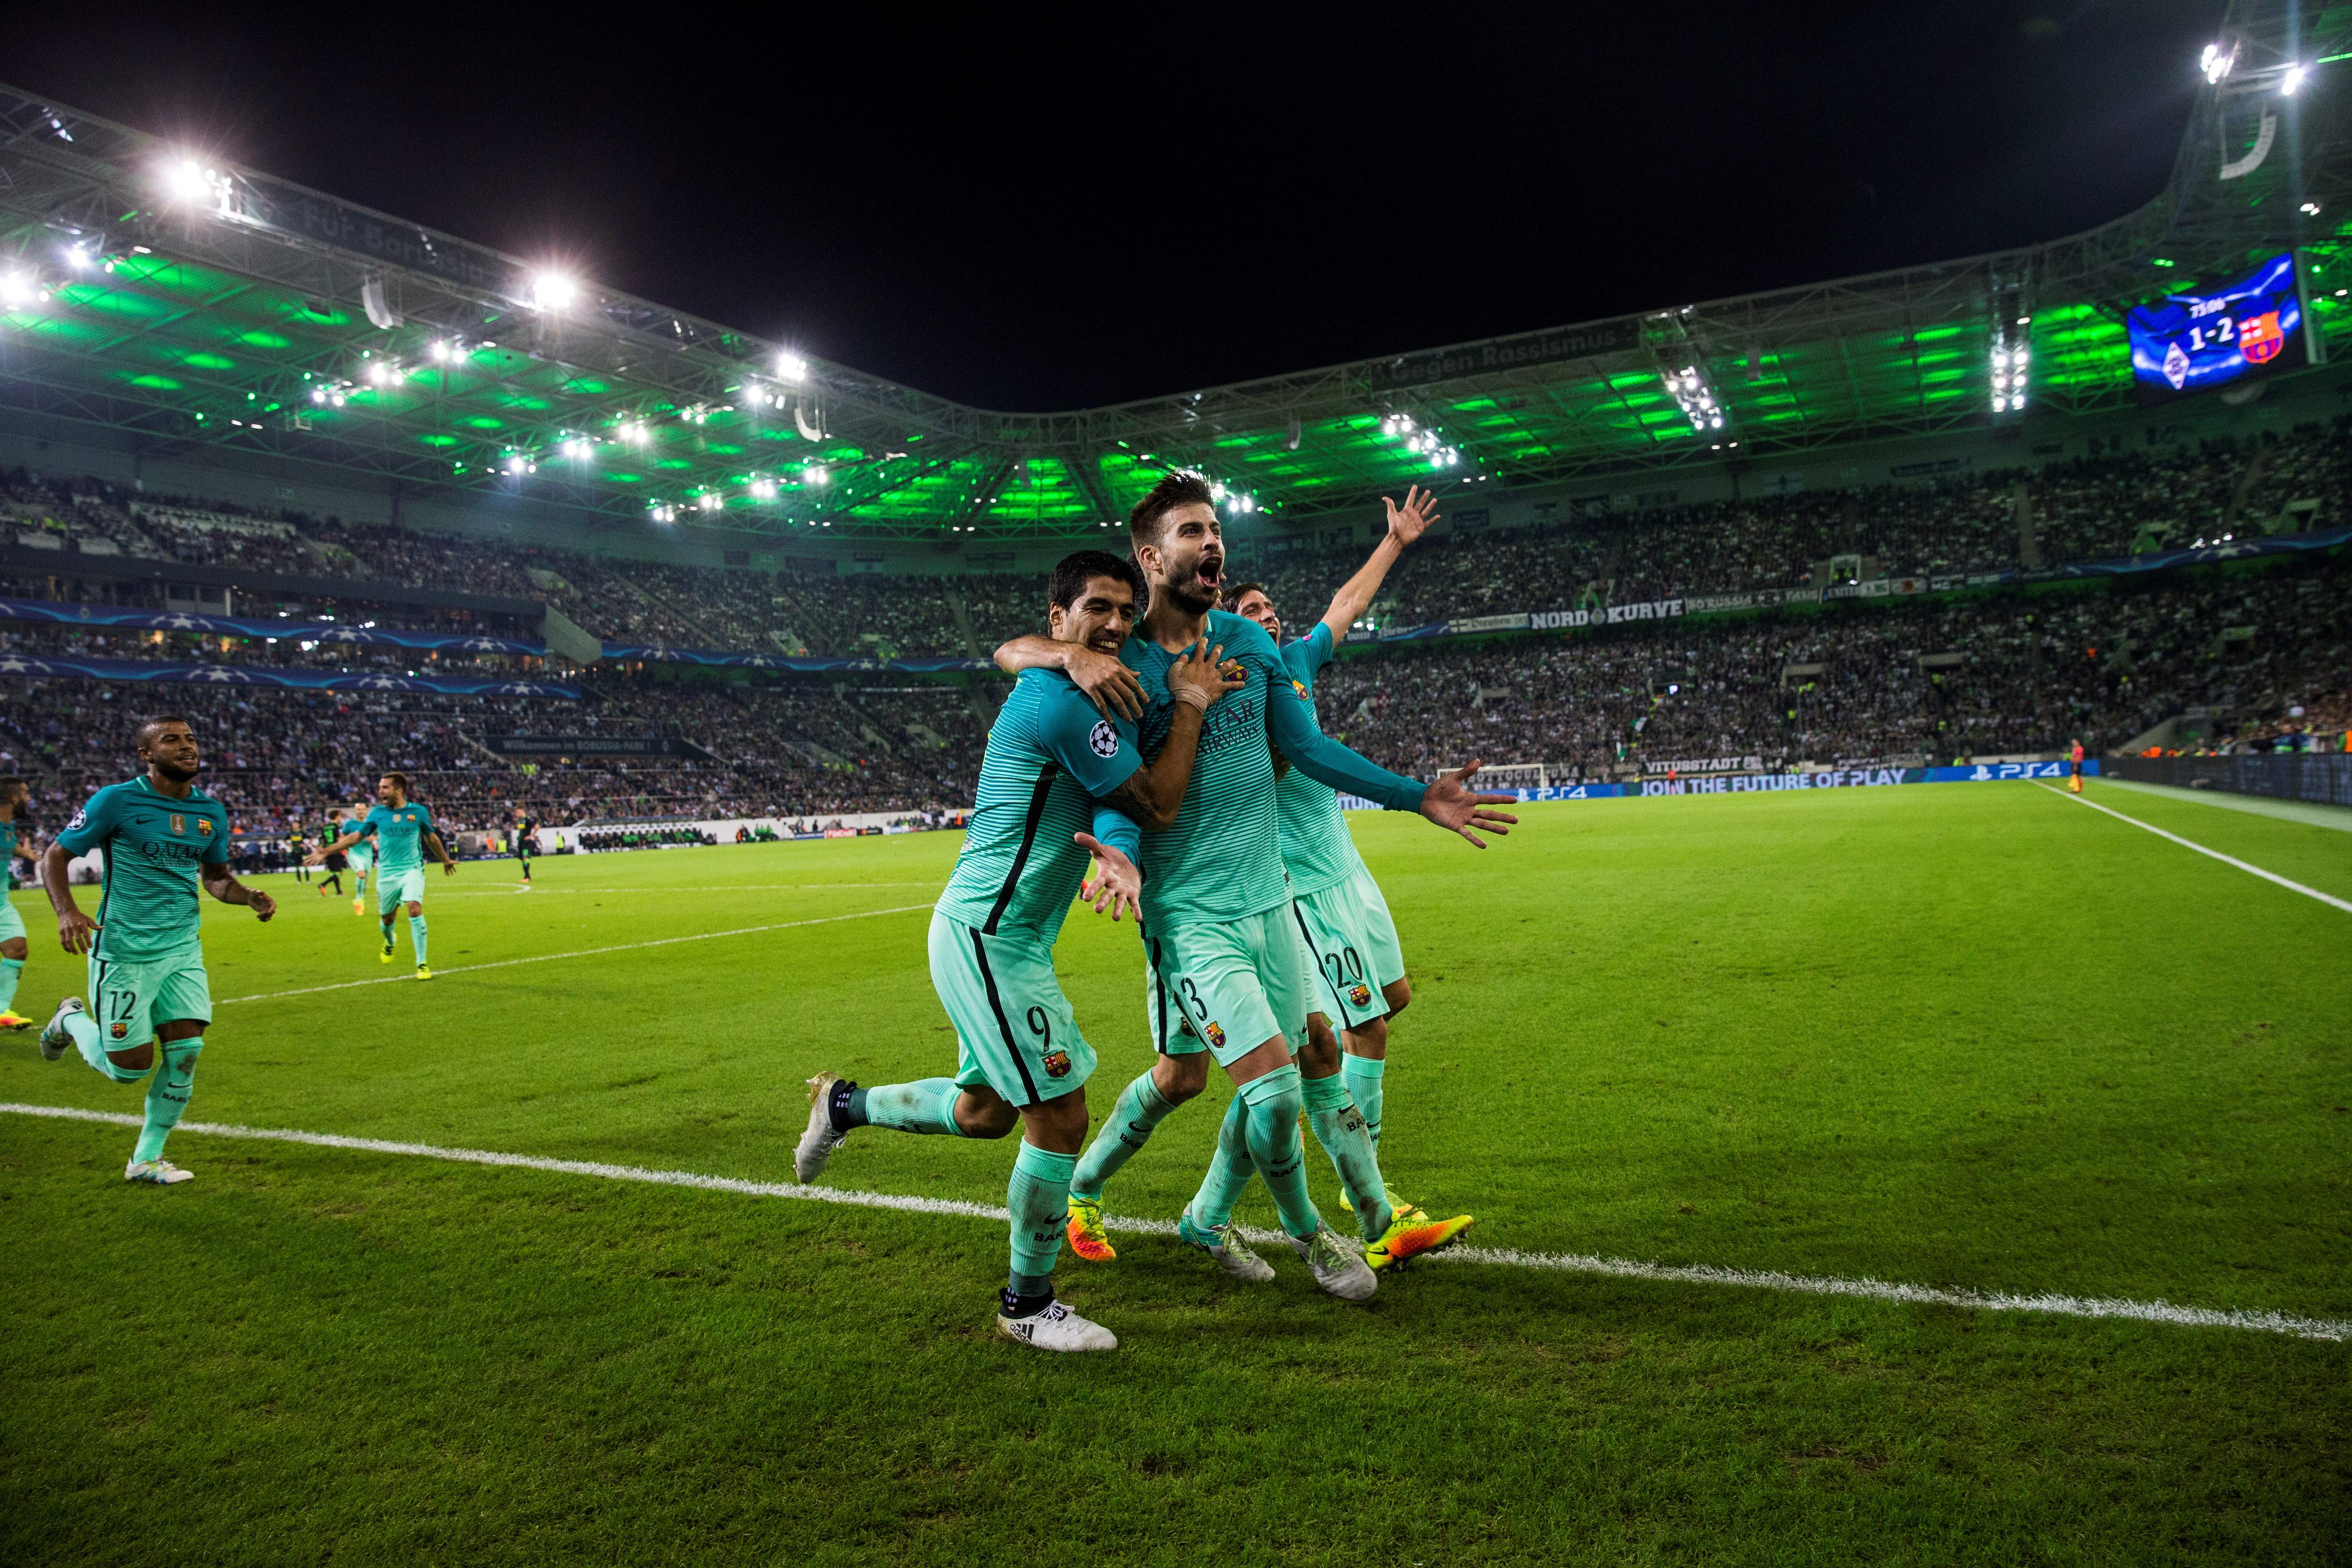 Barcelona's defender Gerard Pique (C) celebrates scoring his side's second goal with team mates Barcelona's Uruguayan forward Luis Suarez (L) and Barcelona's defender Sergi Roberto (R) during the UEFA Champions League first-leg group C football match between Borussia Moenchengladbach and FC Barcelona at the Borussia Park in Moenchengladbach, western Germany on September 28, 2016. / AFP / Odd ANDERSEN        (Photo credit should read ODD ANDERSEN/AFP/Getty Images)